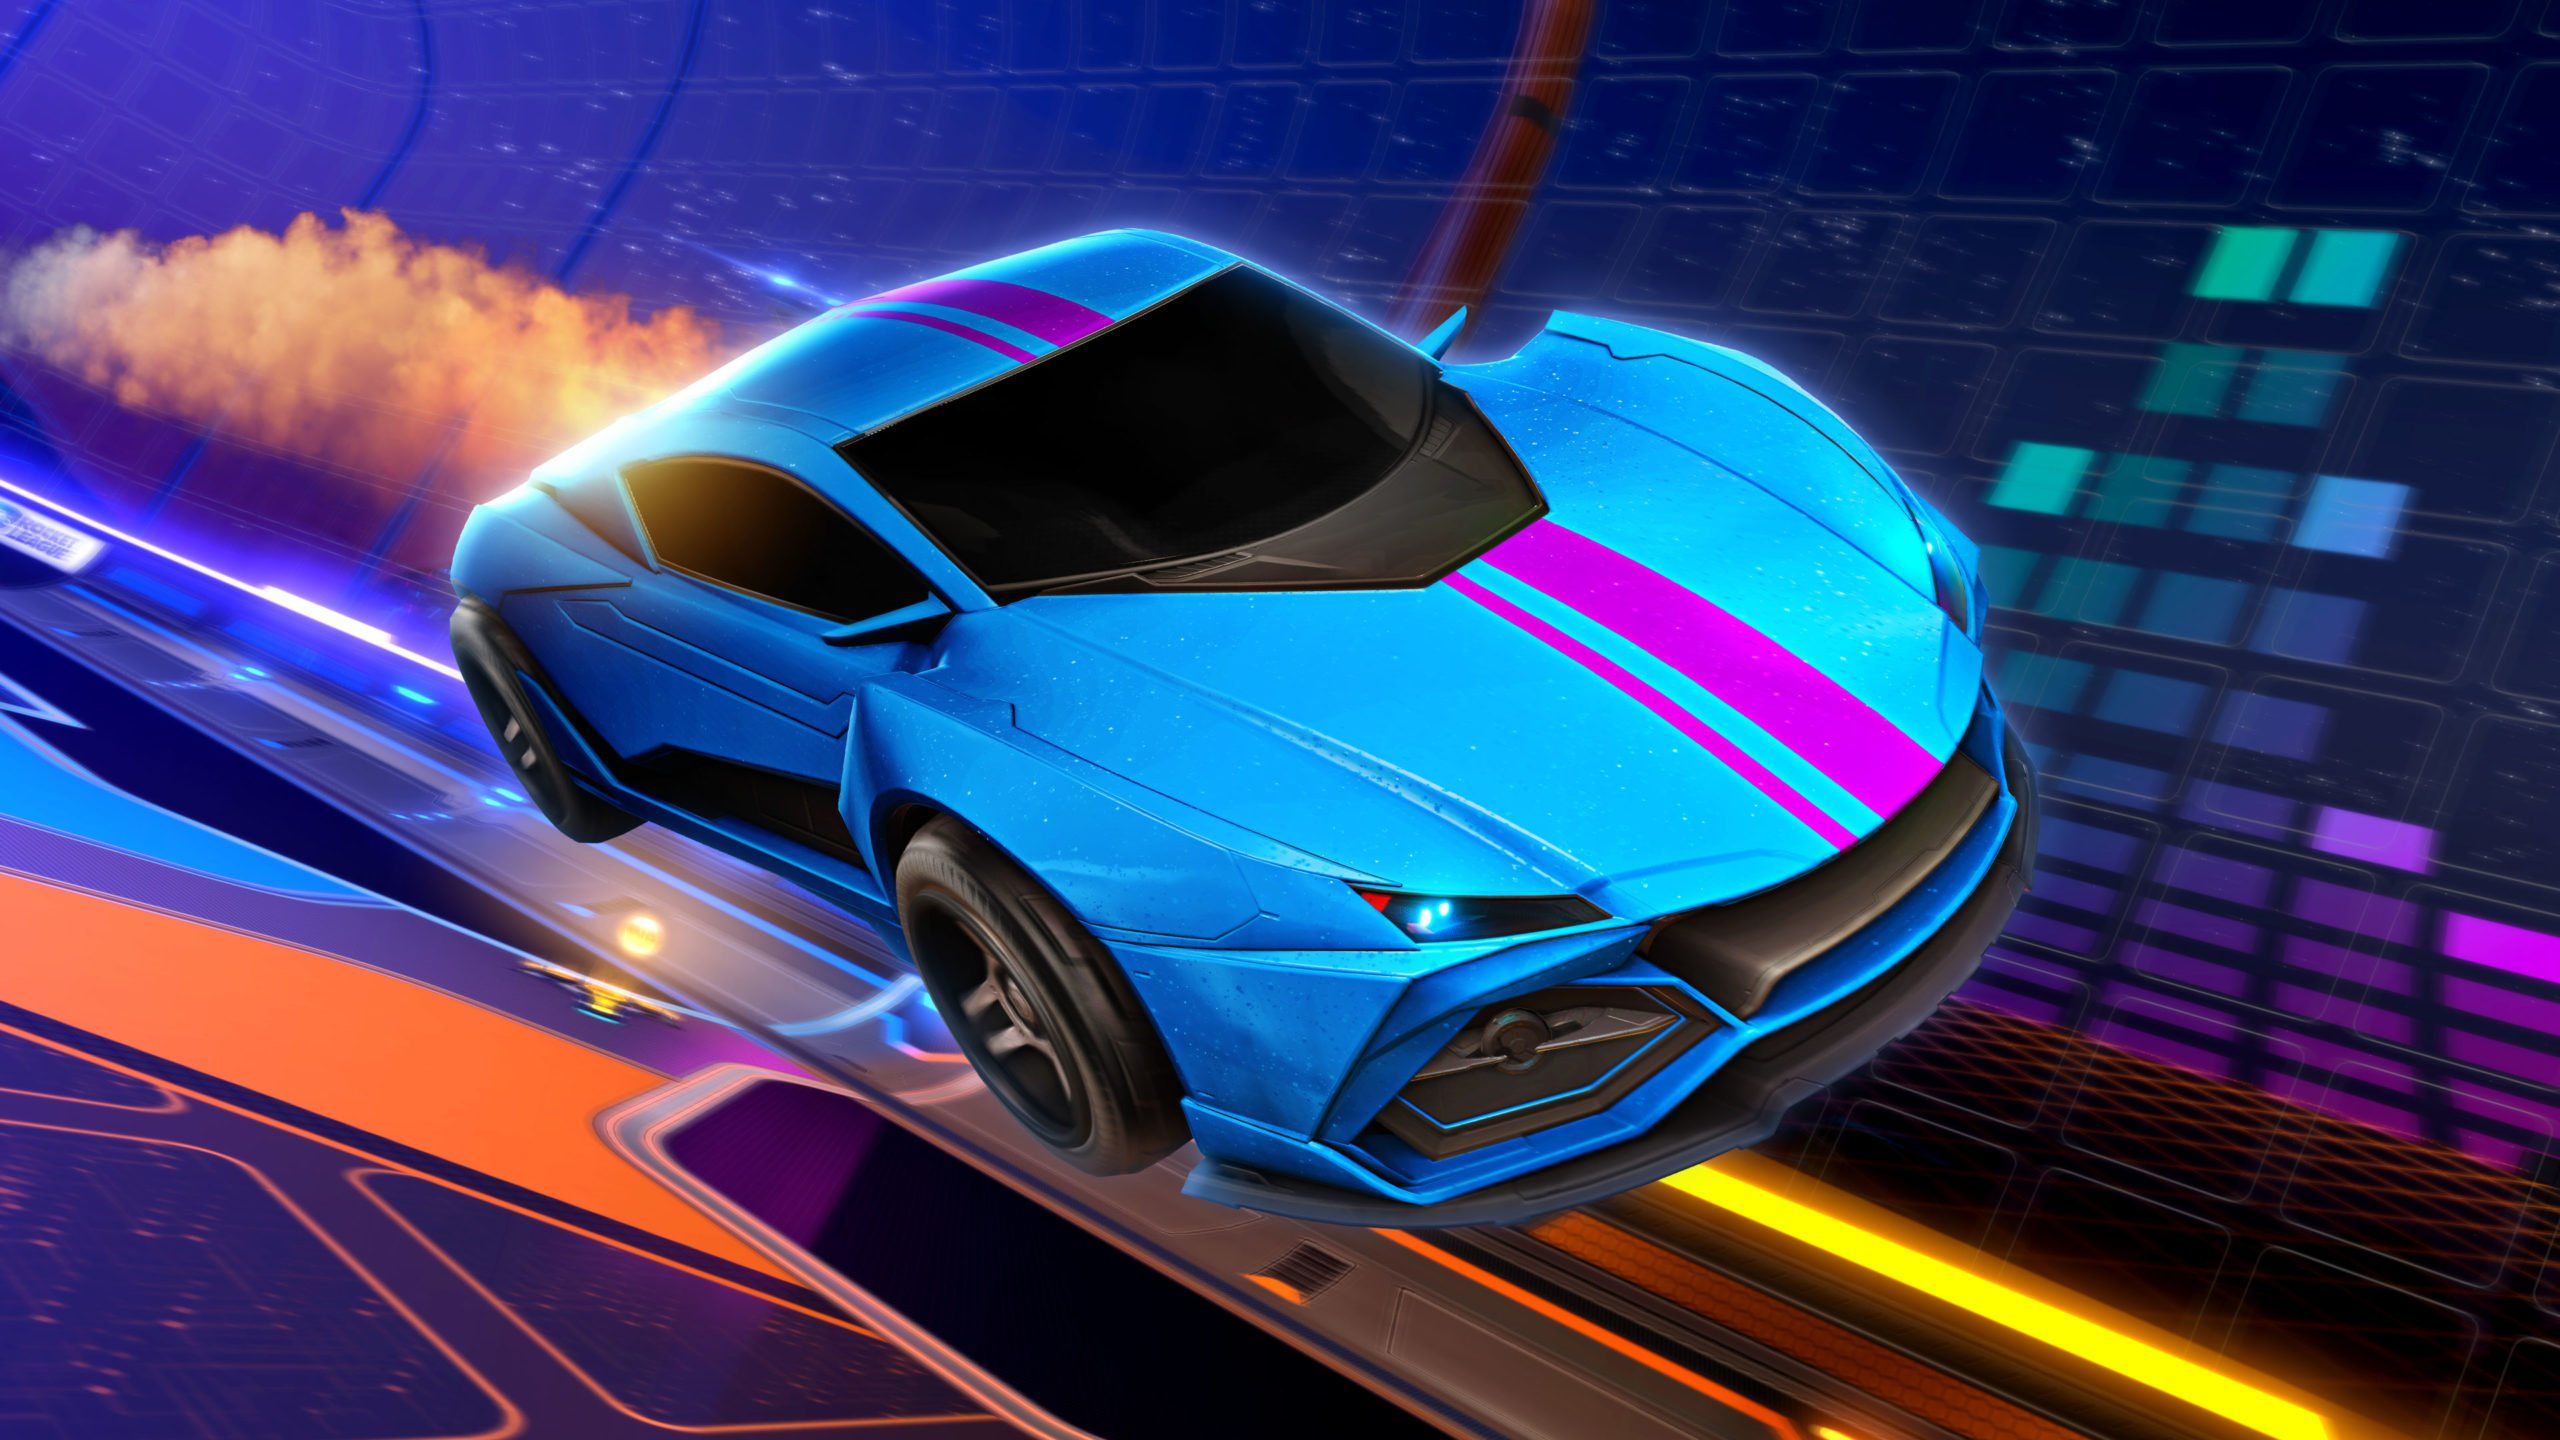 Rocket League's season 2 kicks off on Dec. 9 with a new map and a musical theme